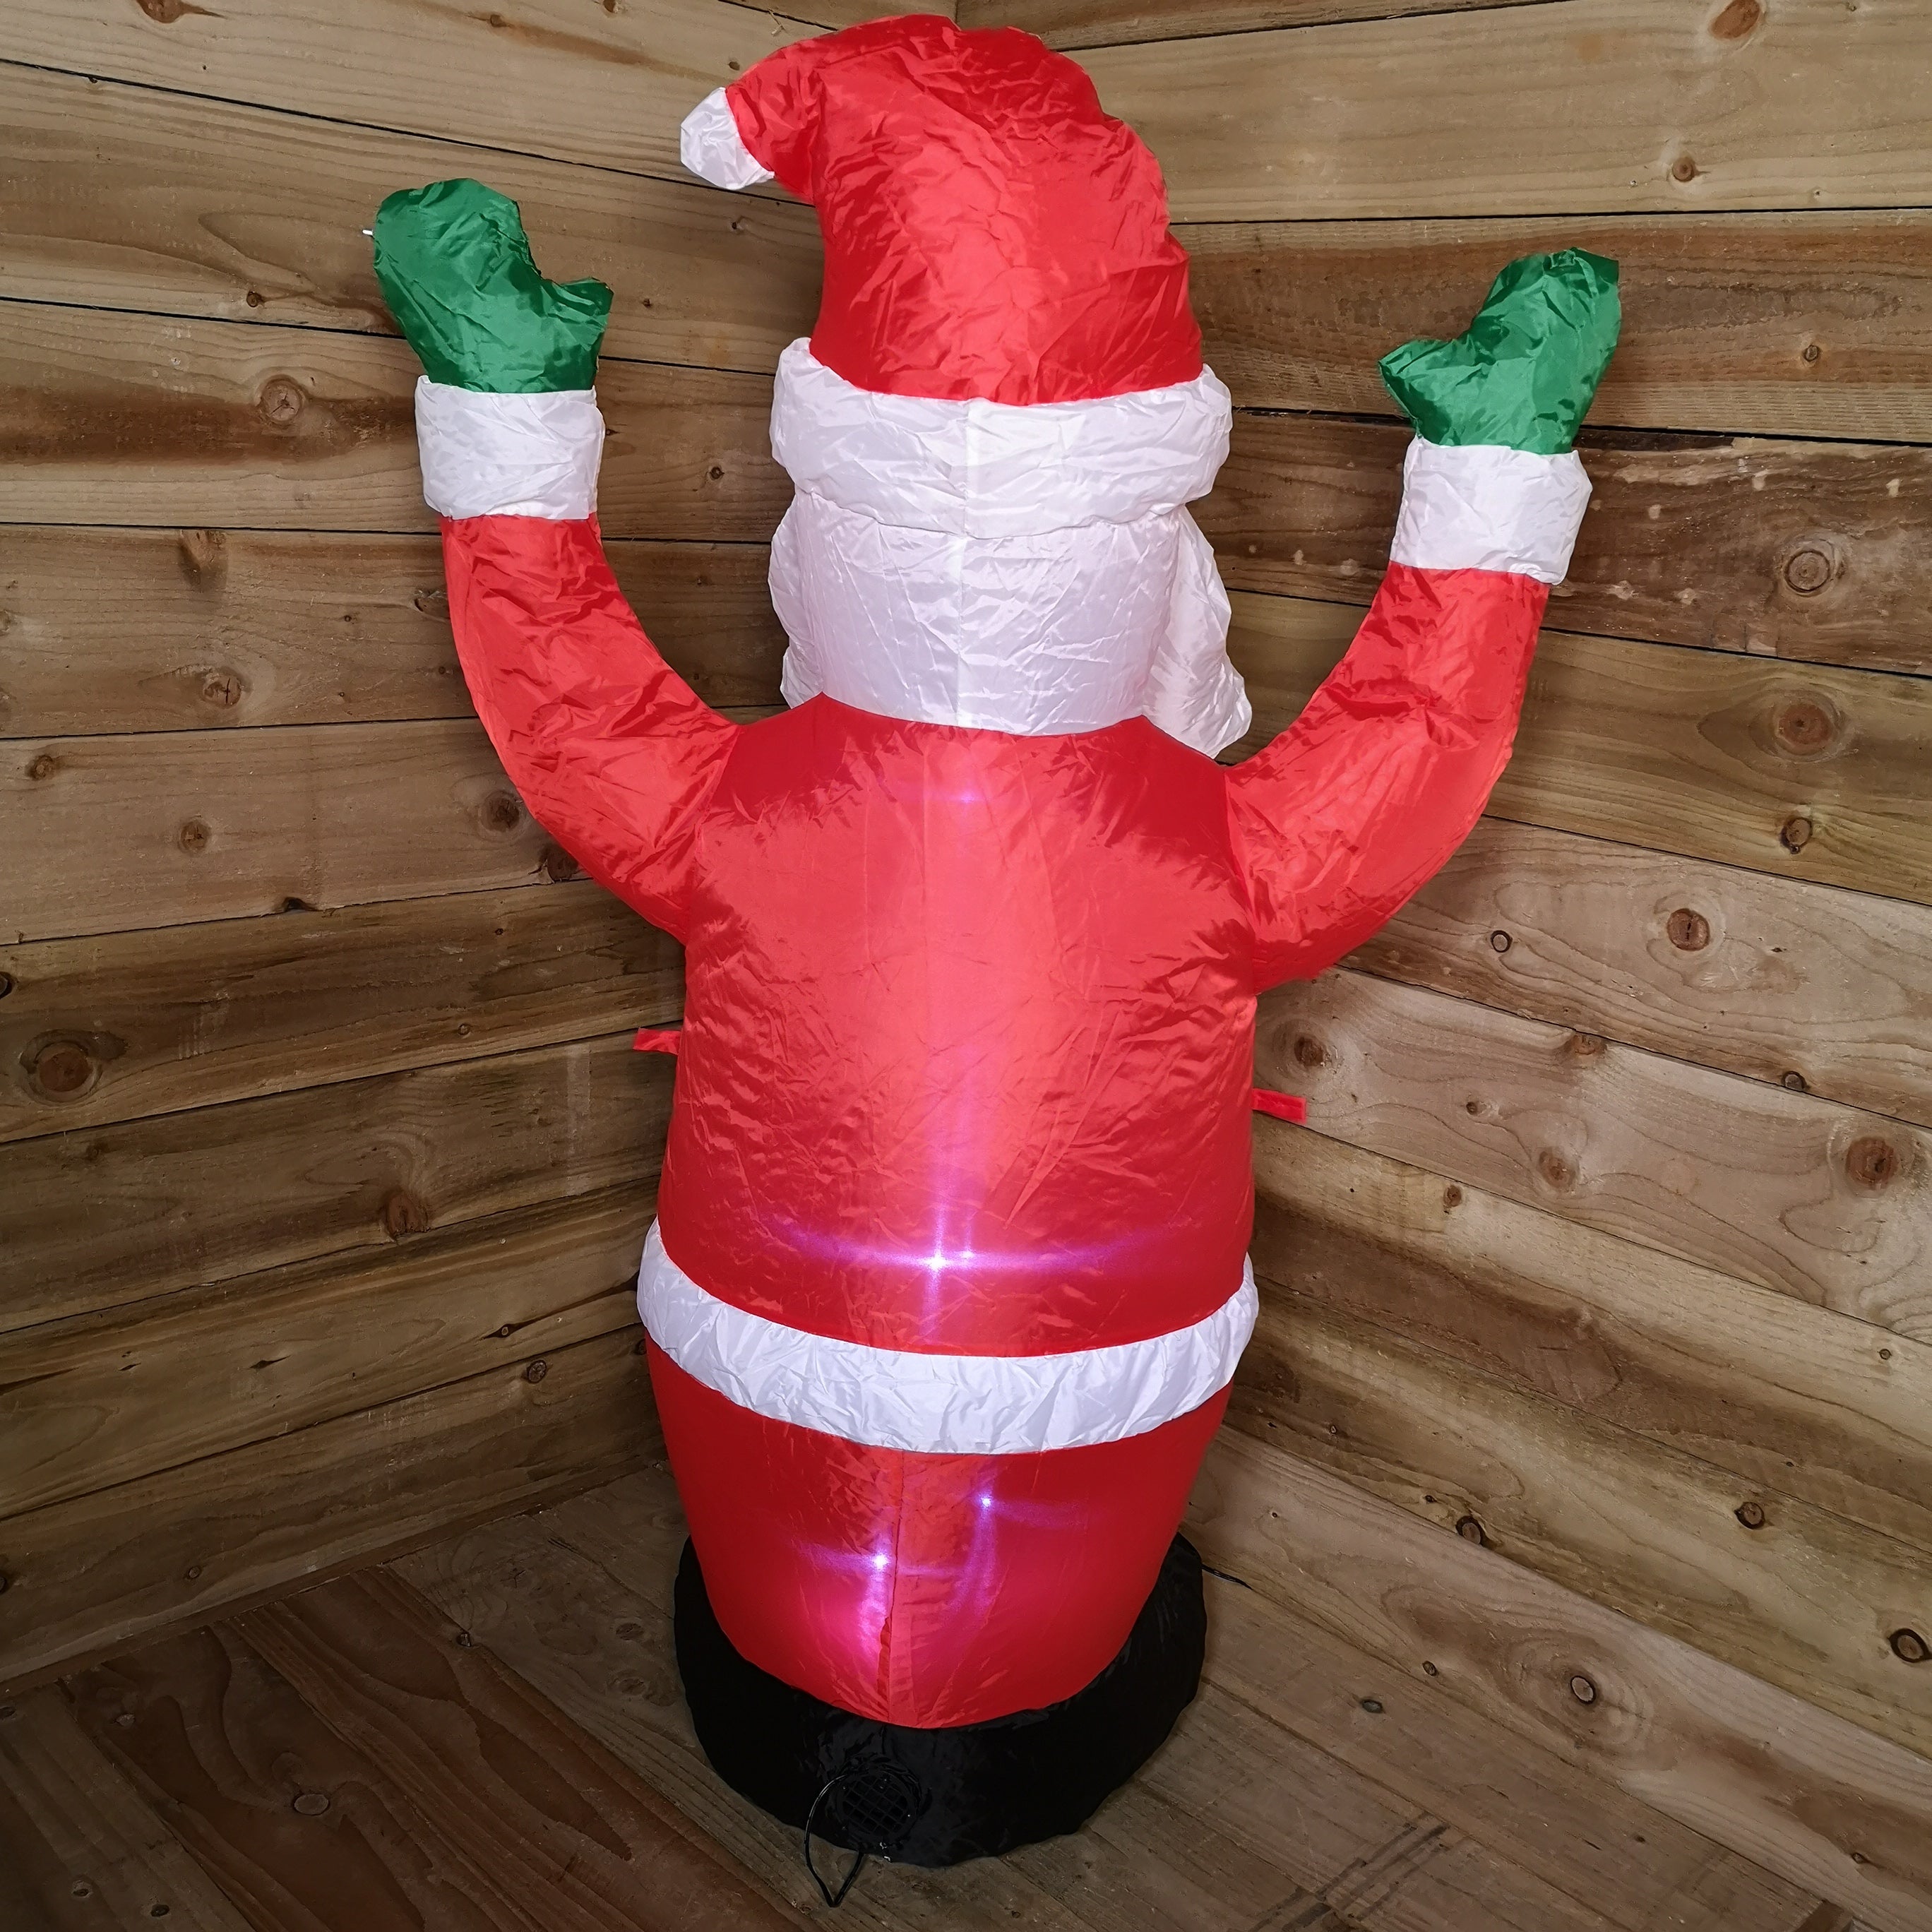 4ft (120cm) LED Outdoor Christmas Inflatable Santa Claus Indoor /Outdoor Decoration